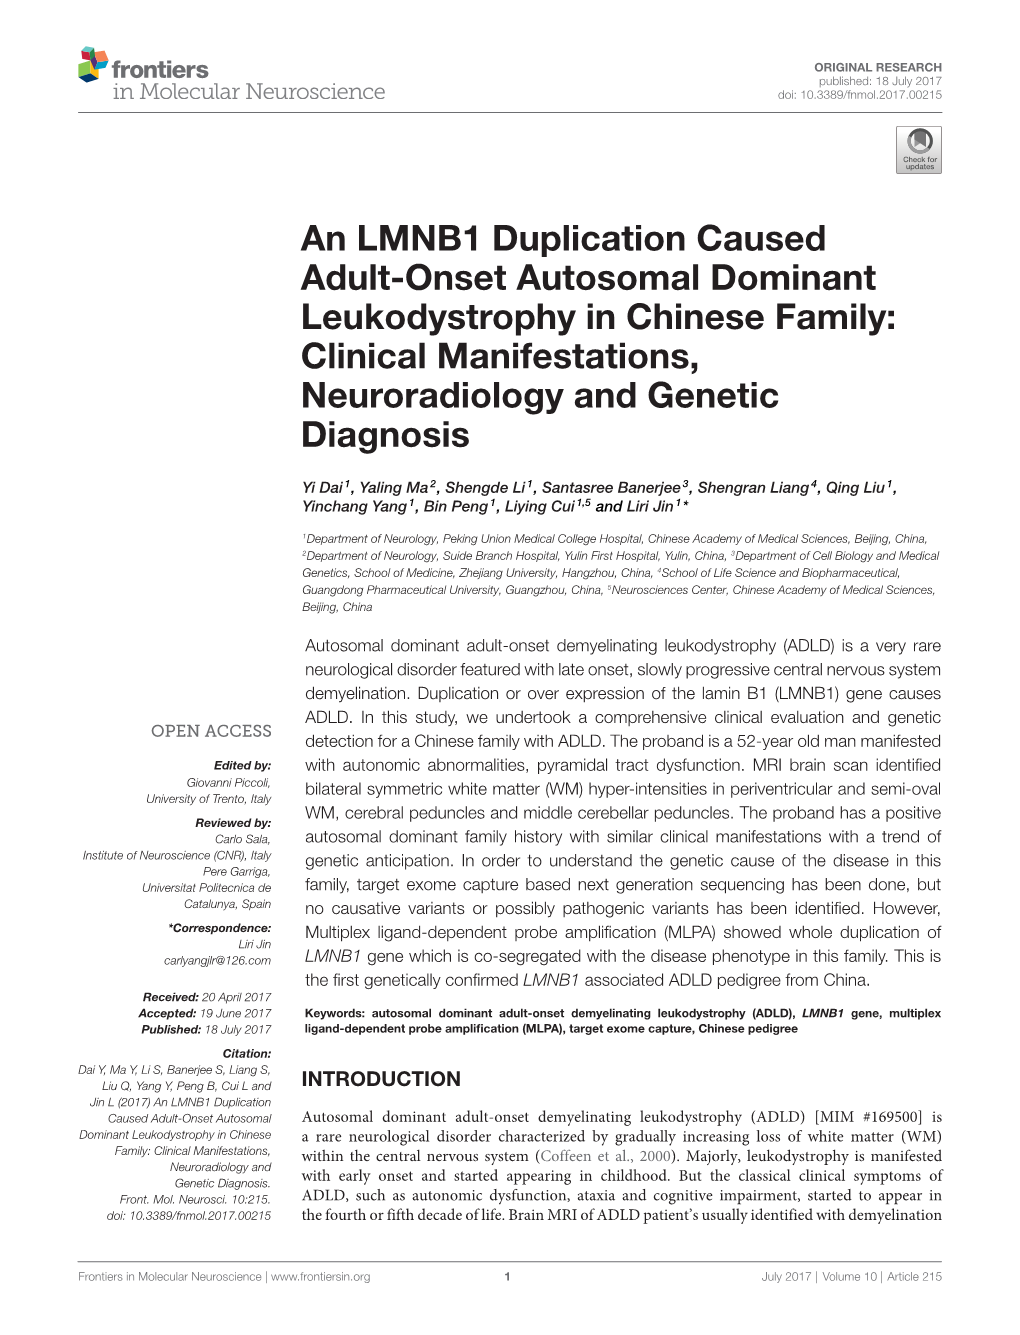 An LMNB1 Duplication Caused Adult-Onset Autosomal Dominant Leukodystrophy in Chinese Family: Clinical Manifestations, Neuroradiology and Genetic Diagnosis